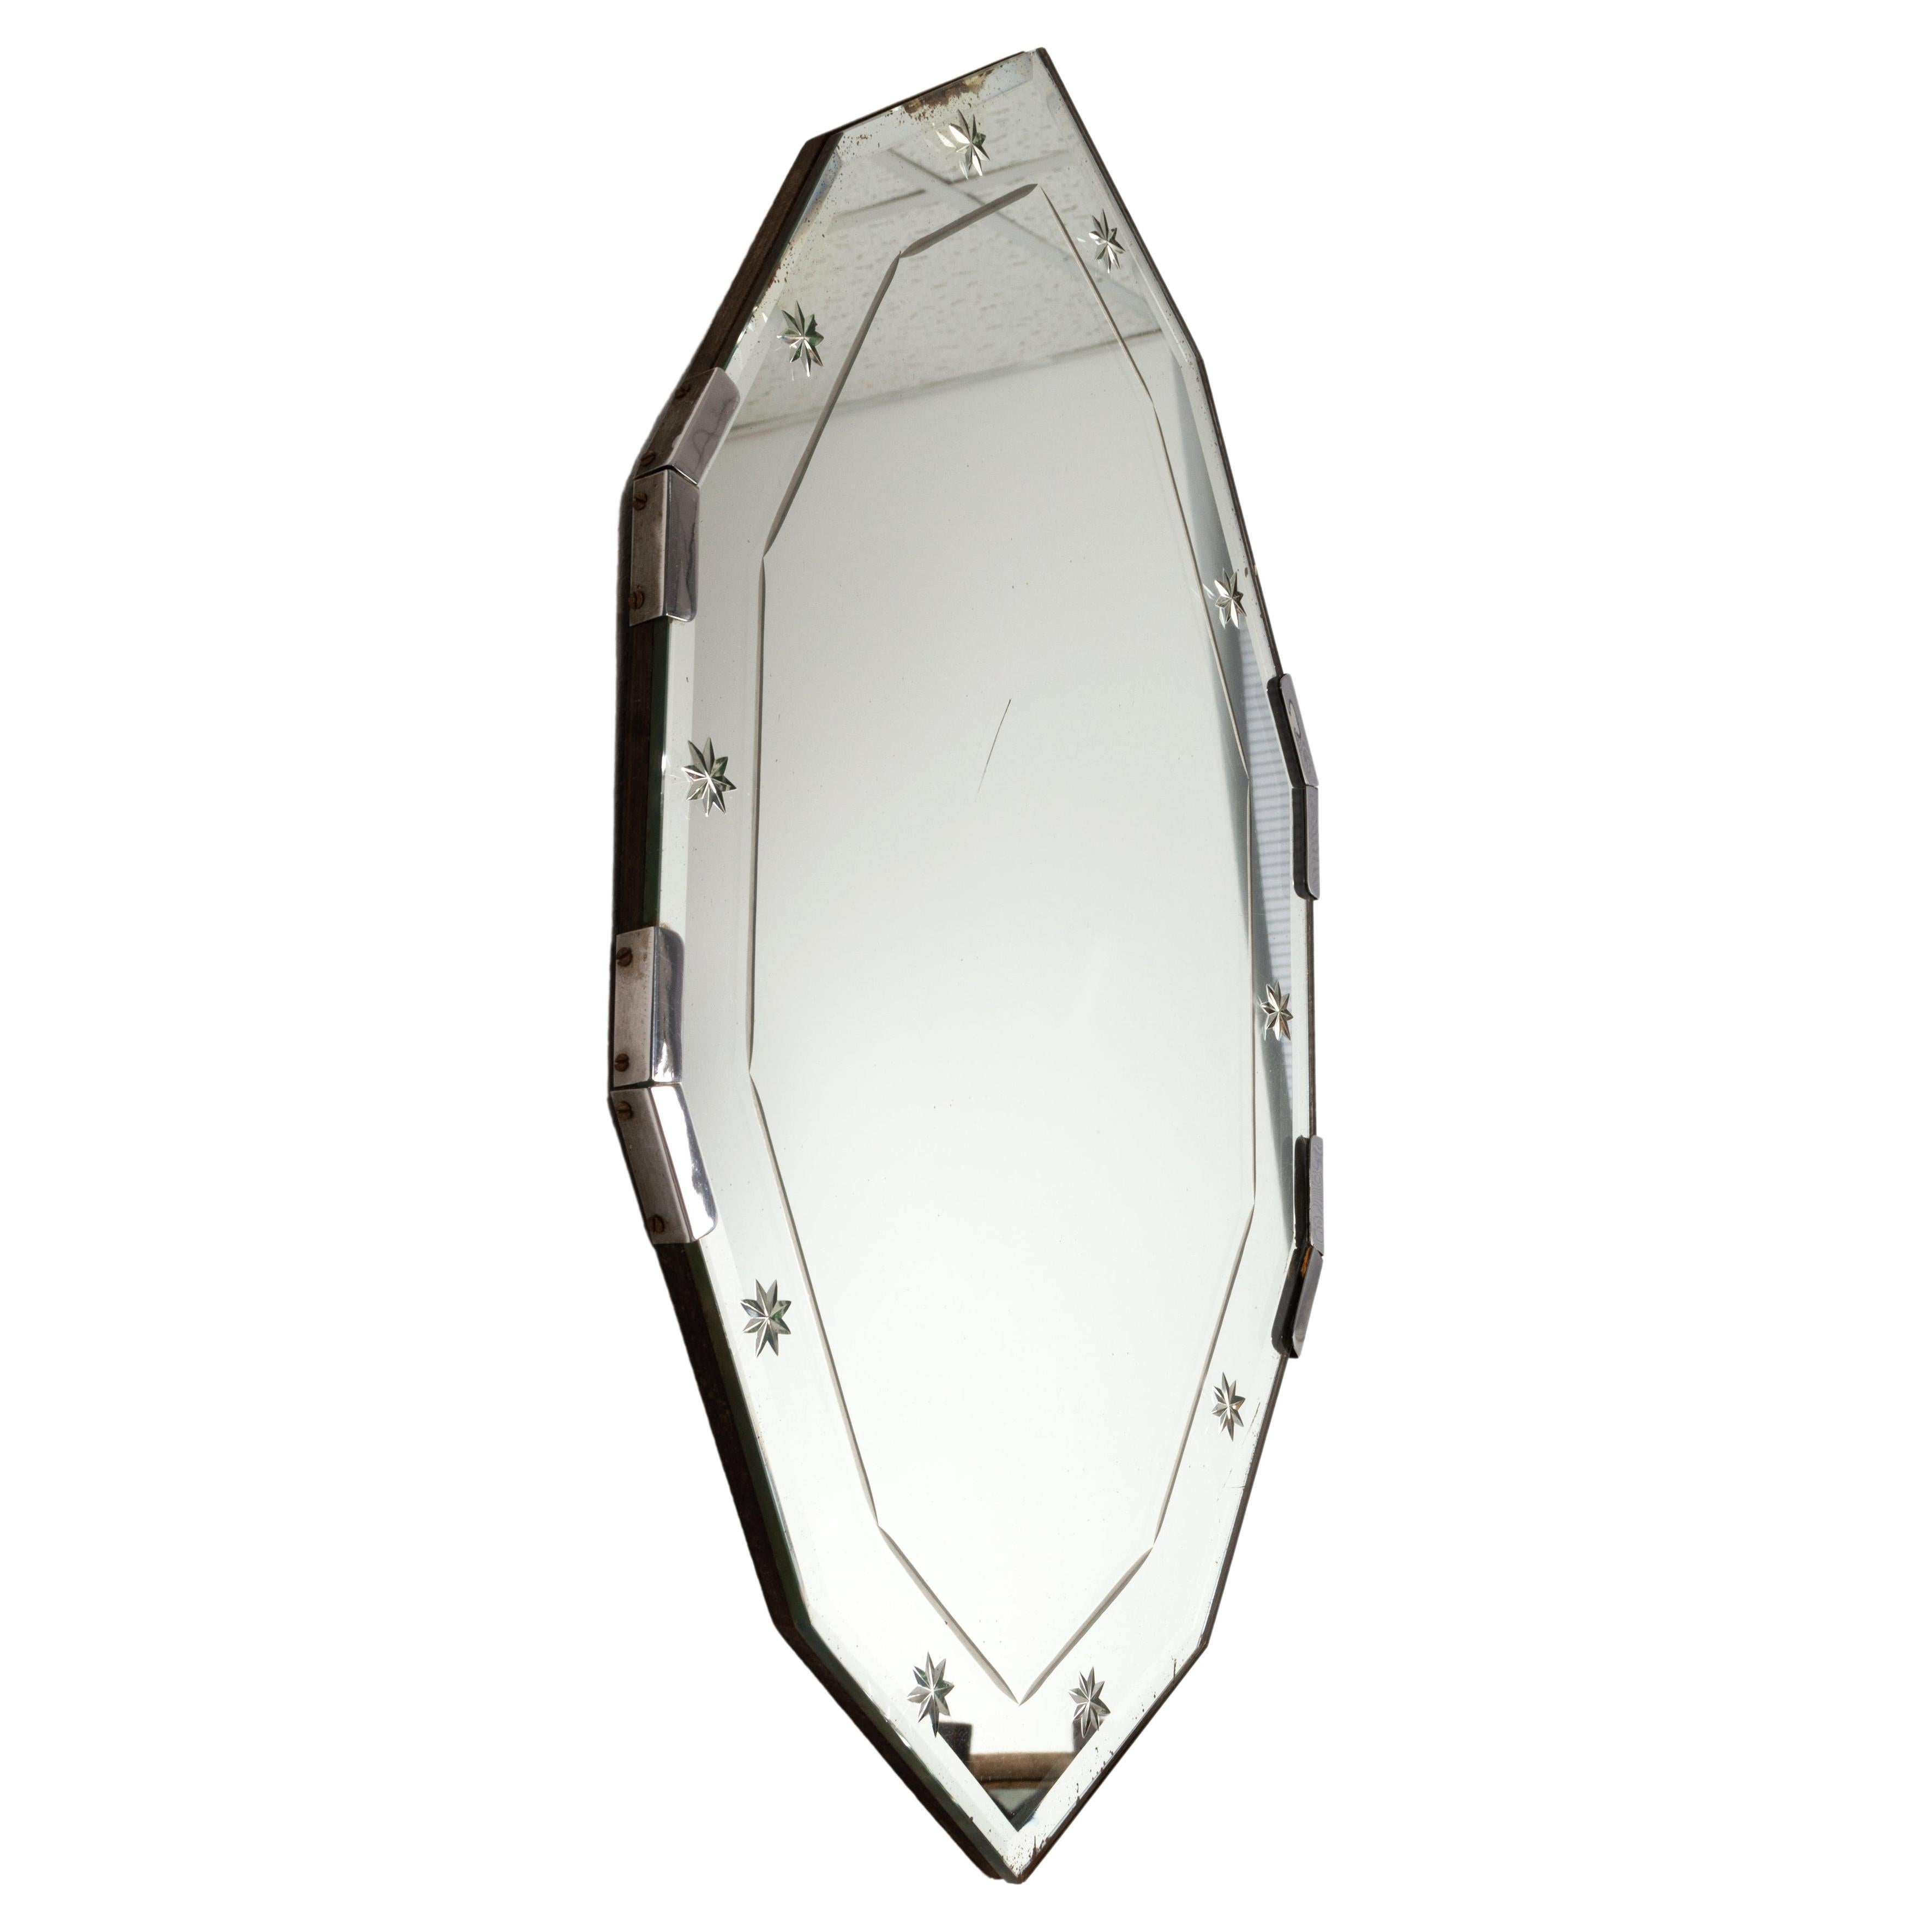 French Art Deco Etched Star Cut Glass Mirror C.1930

A charming mirror, of unusual form.

In very good condition, with very light foxing to the original mercury glass (around the edges, and a small line in the centre) please see photo.